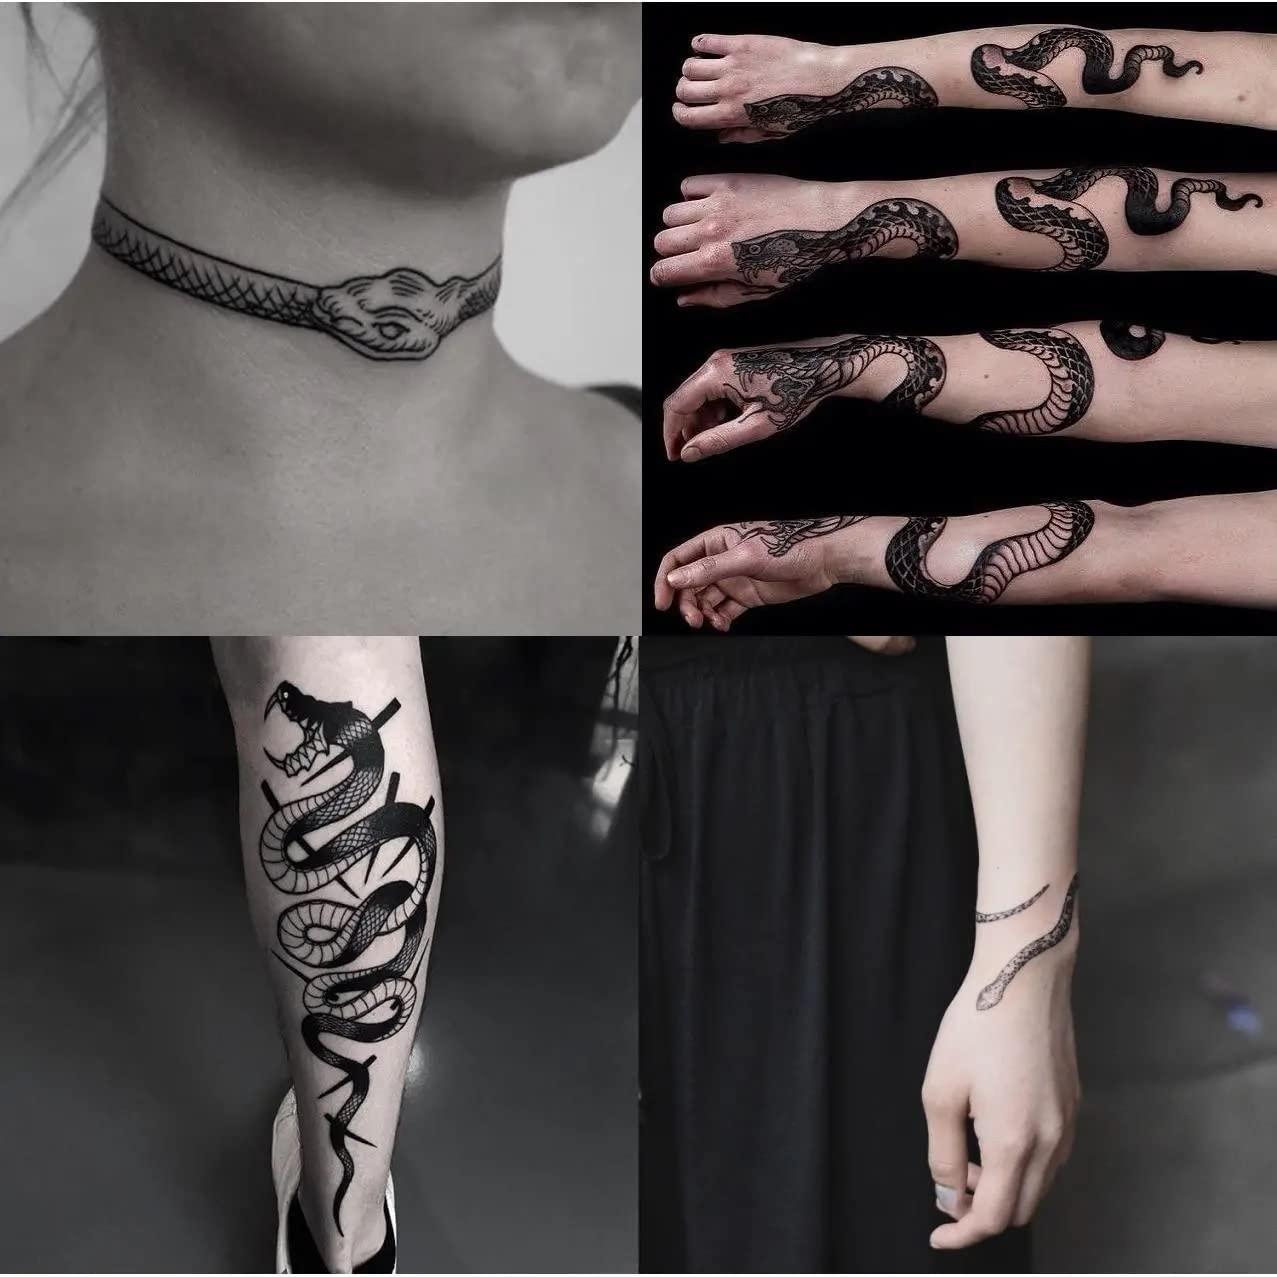 What does a snake tattoo symbolize? - Quora